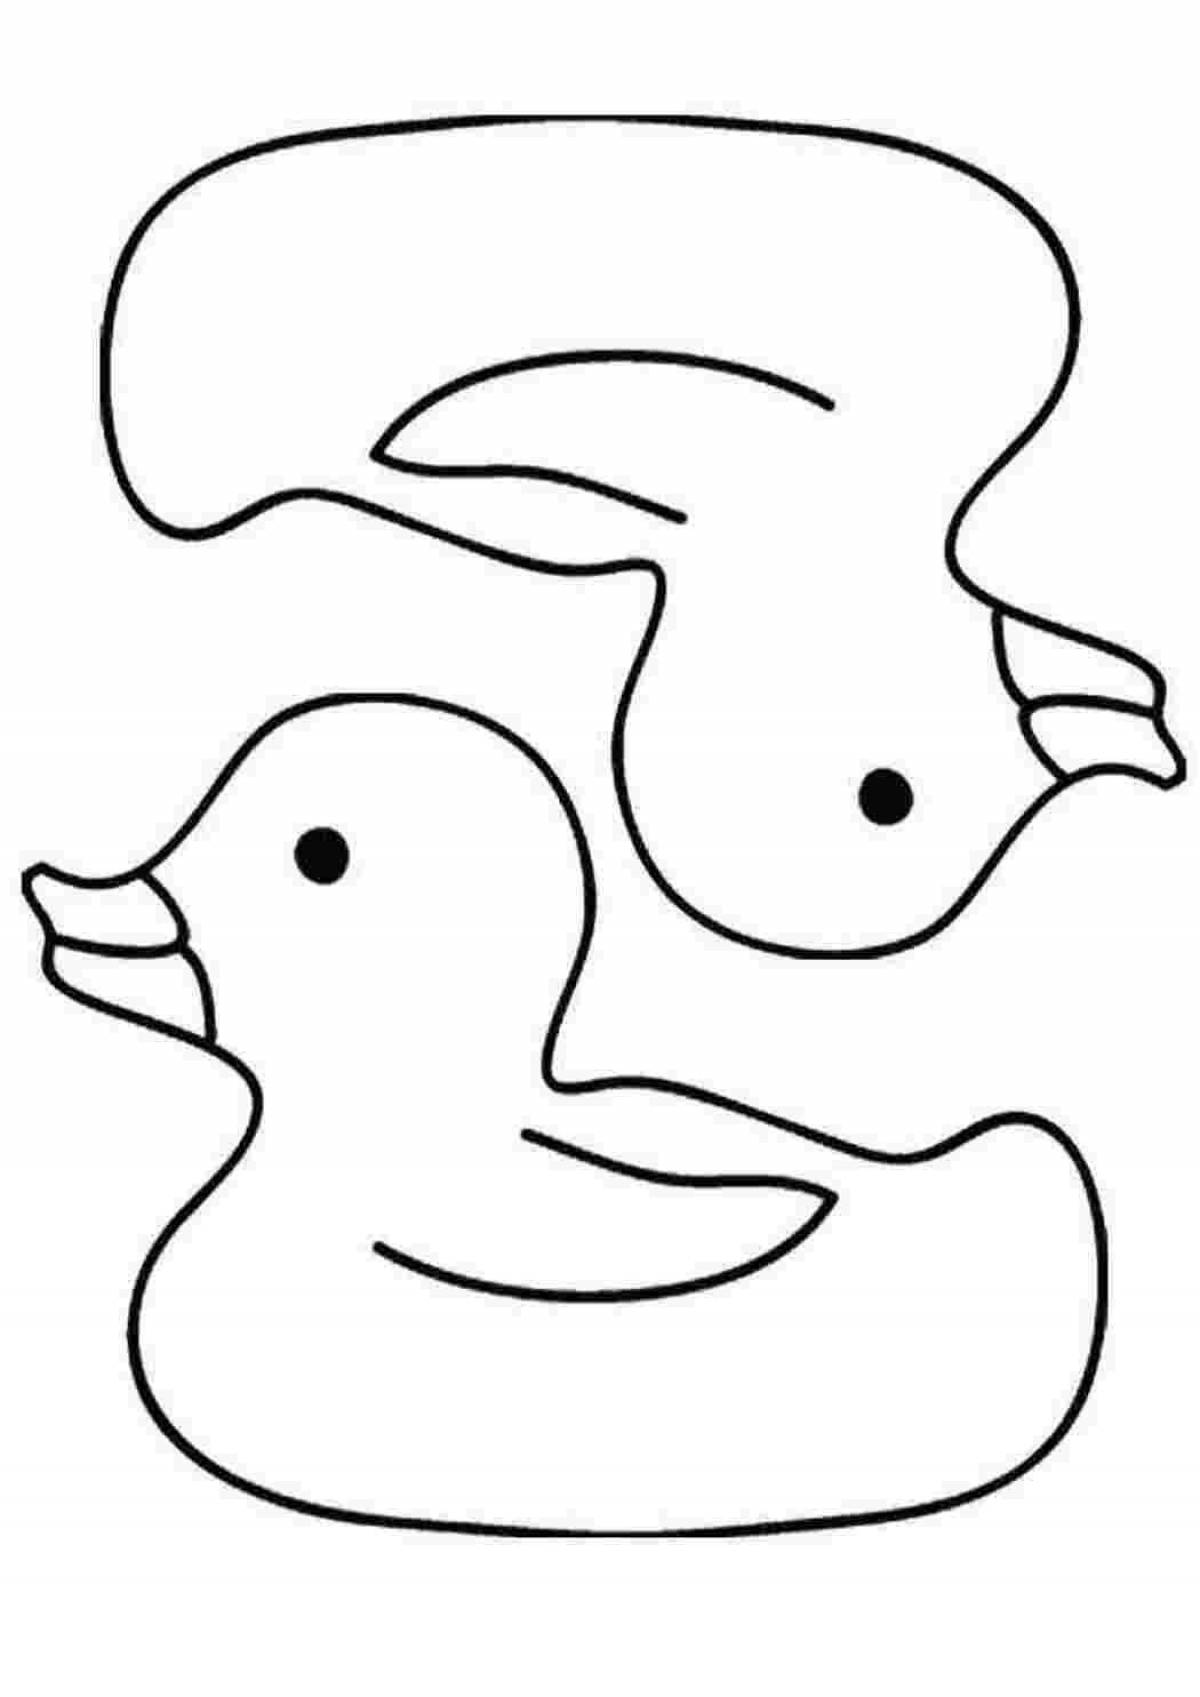 Charming hazy duck coloring book